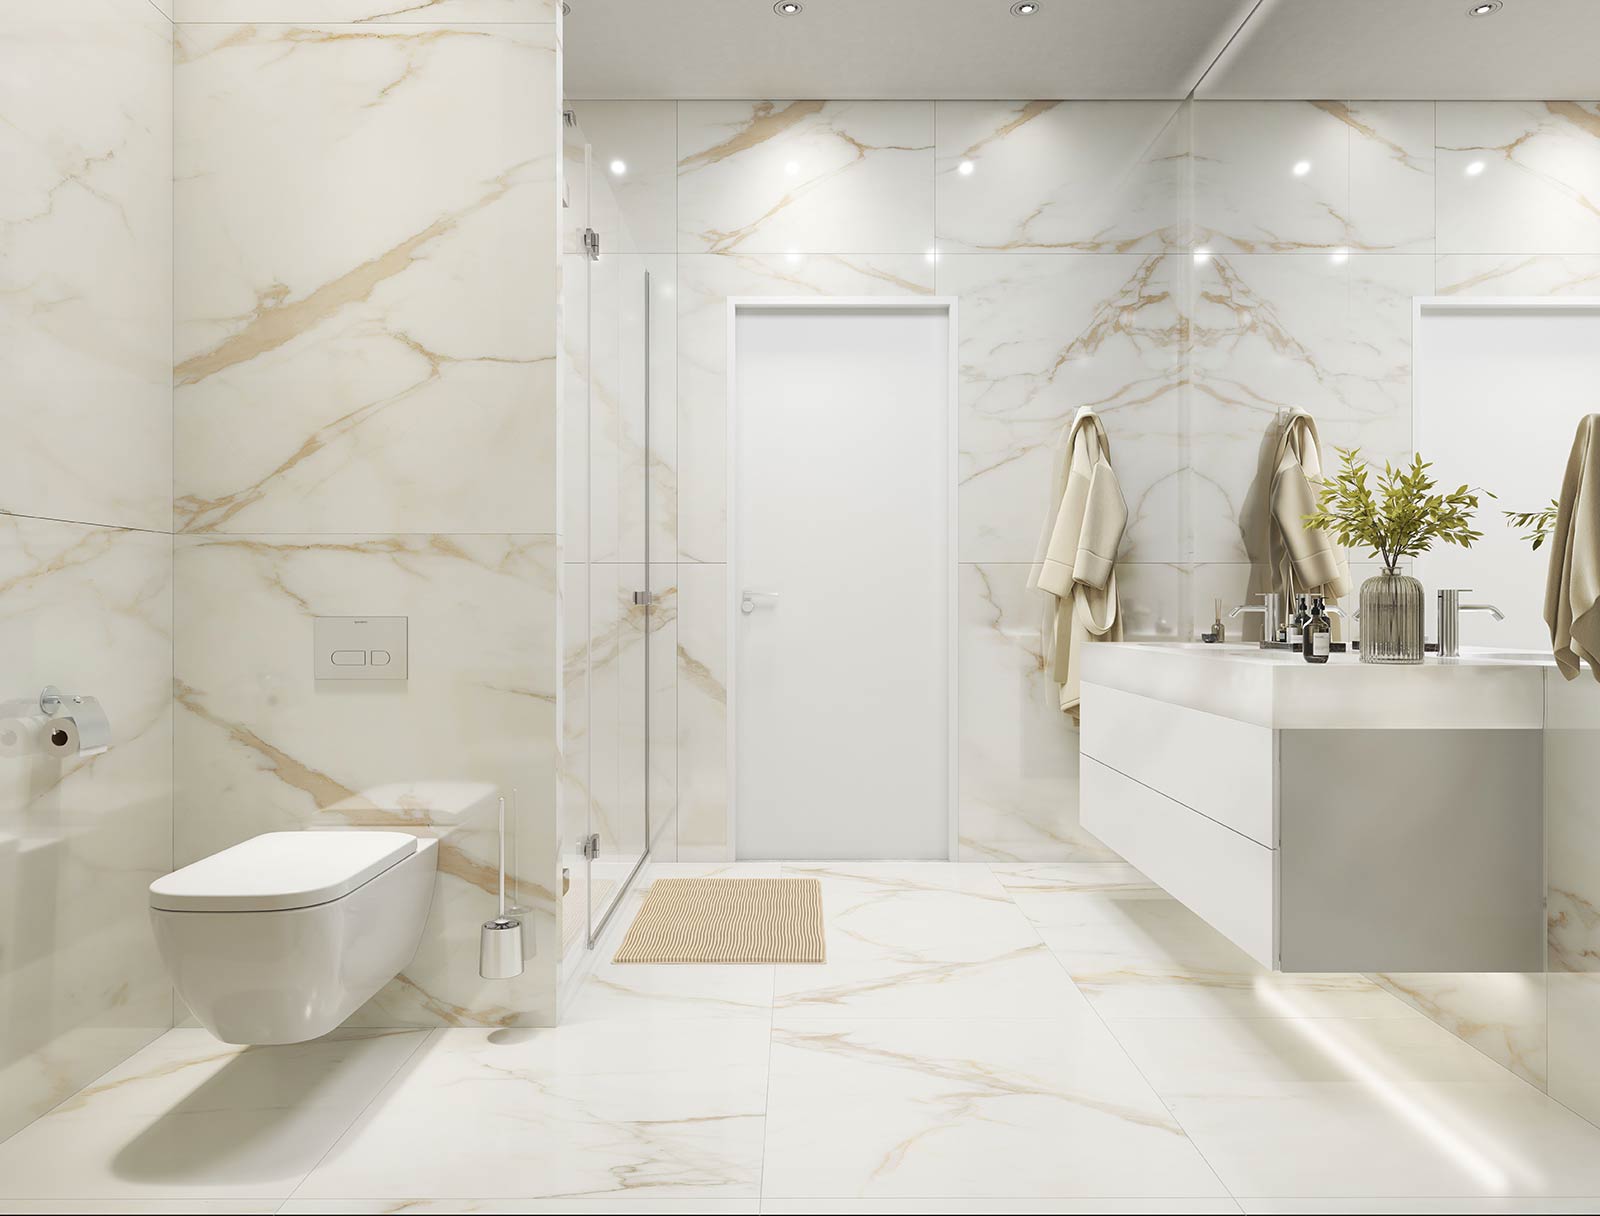 Here is the bathroom of the real estate program 29 Beausoleil in Monaco.